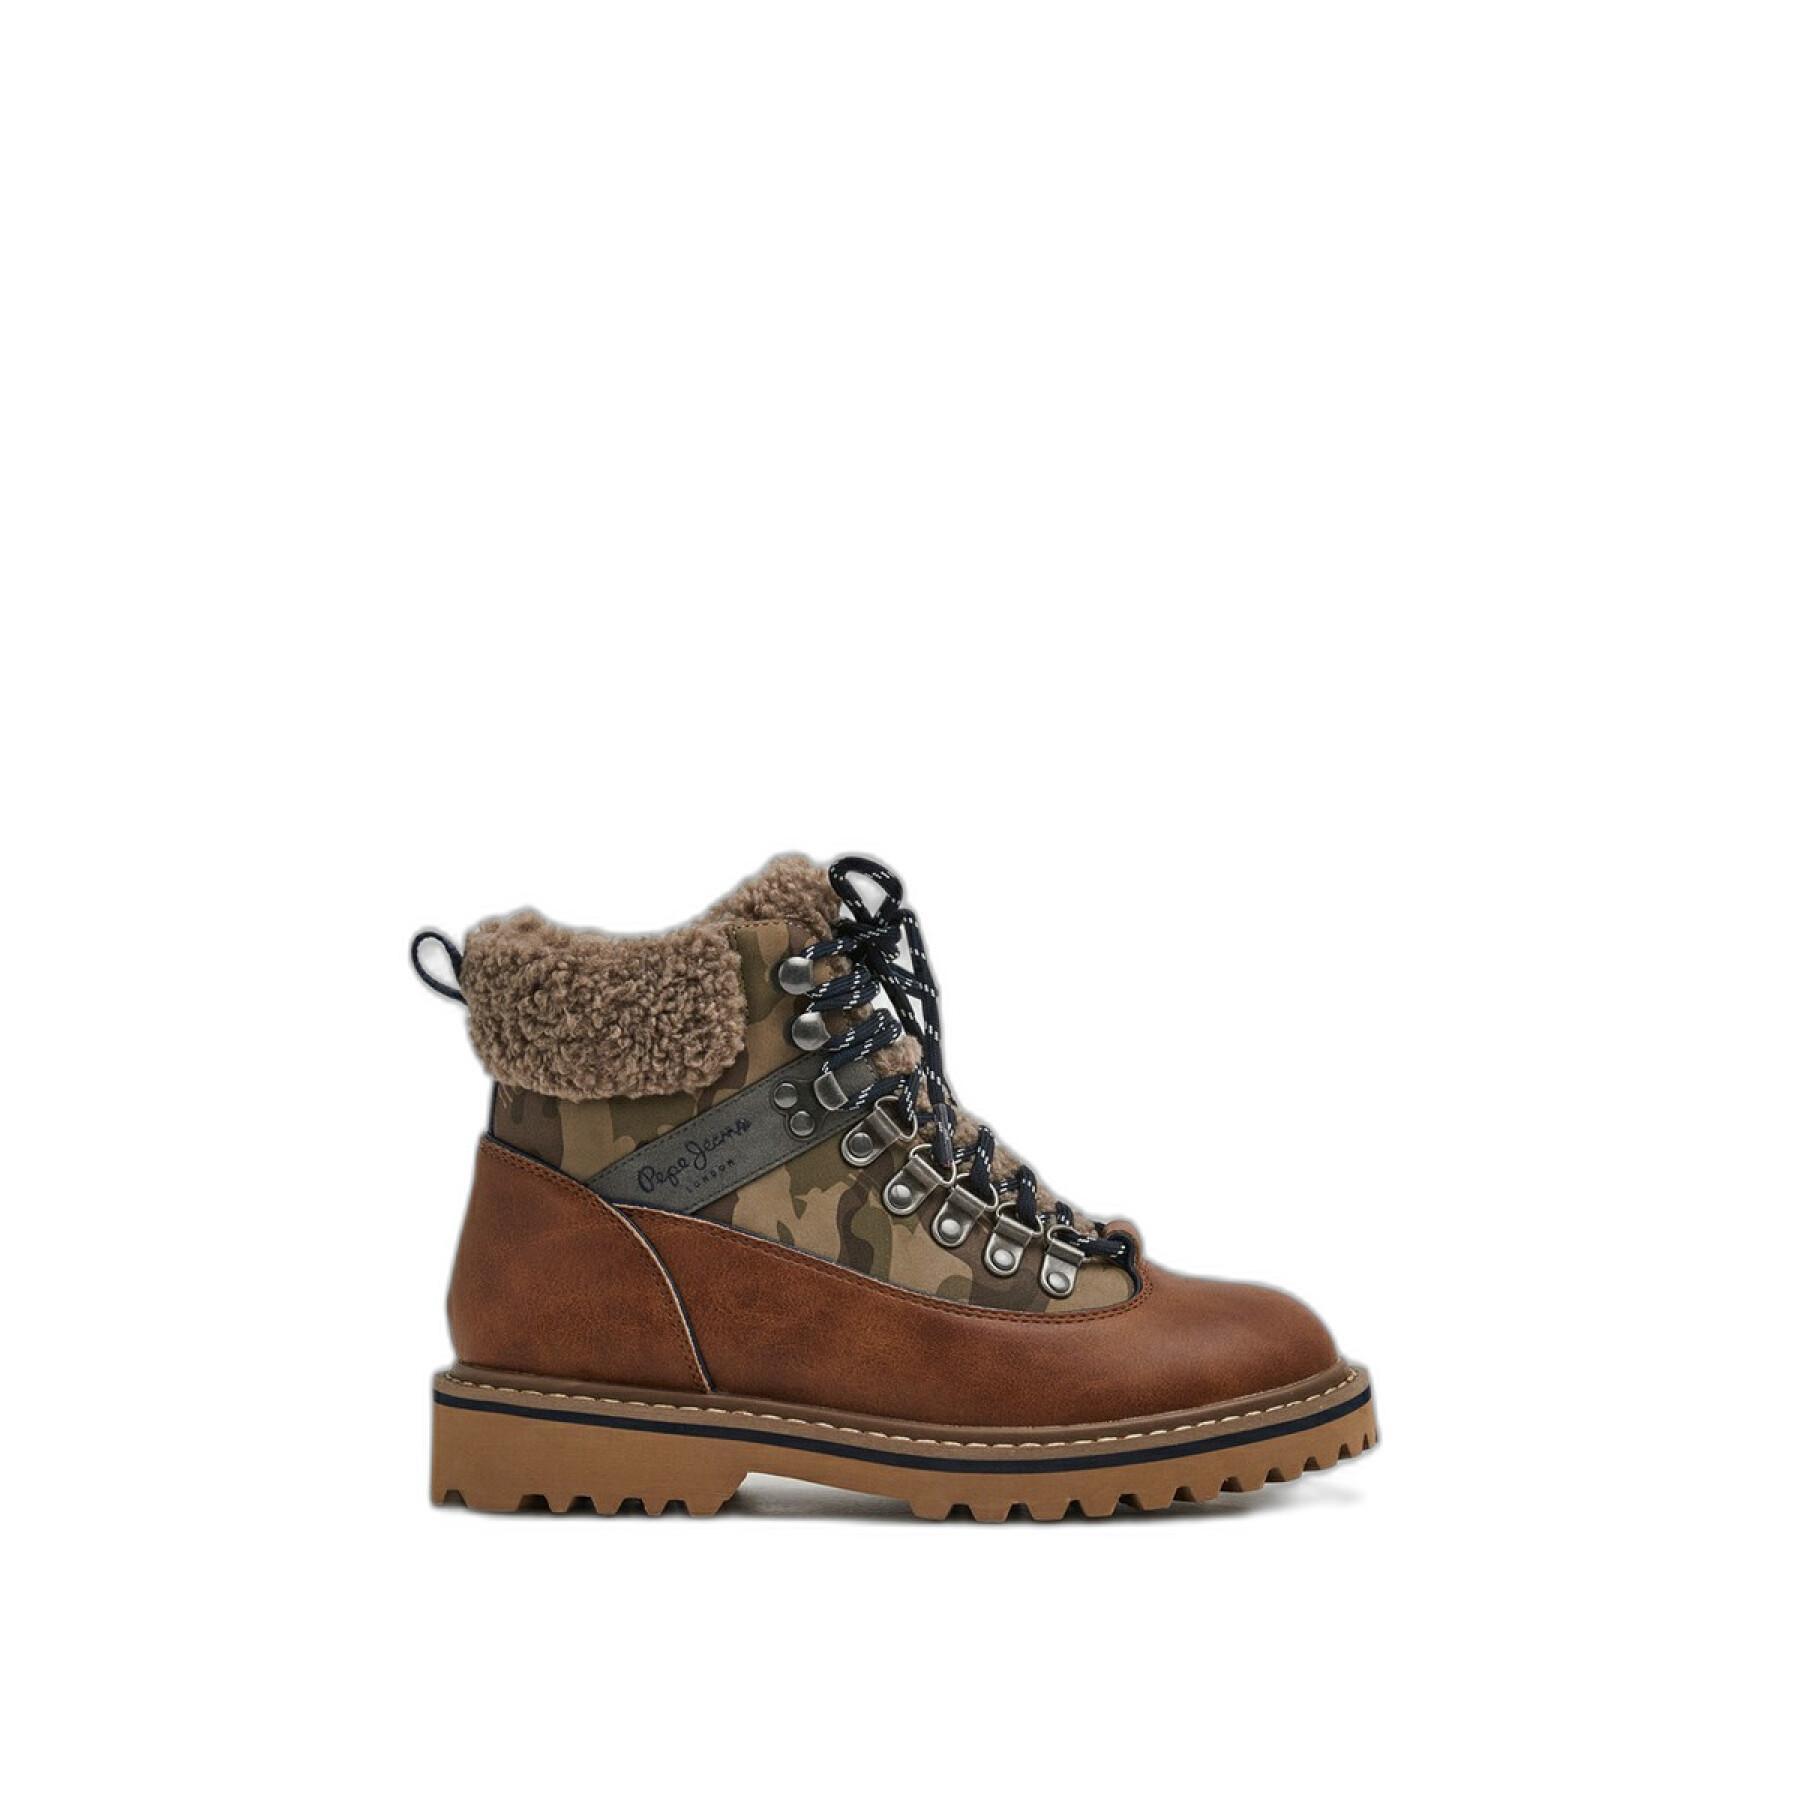 Children's boots Pepe Jeans Leia K2